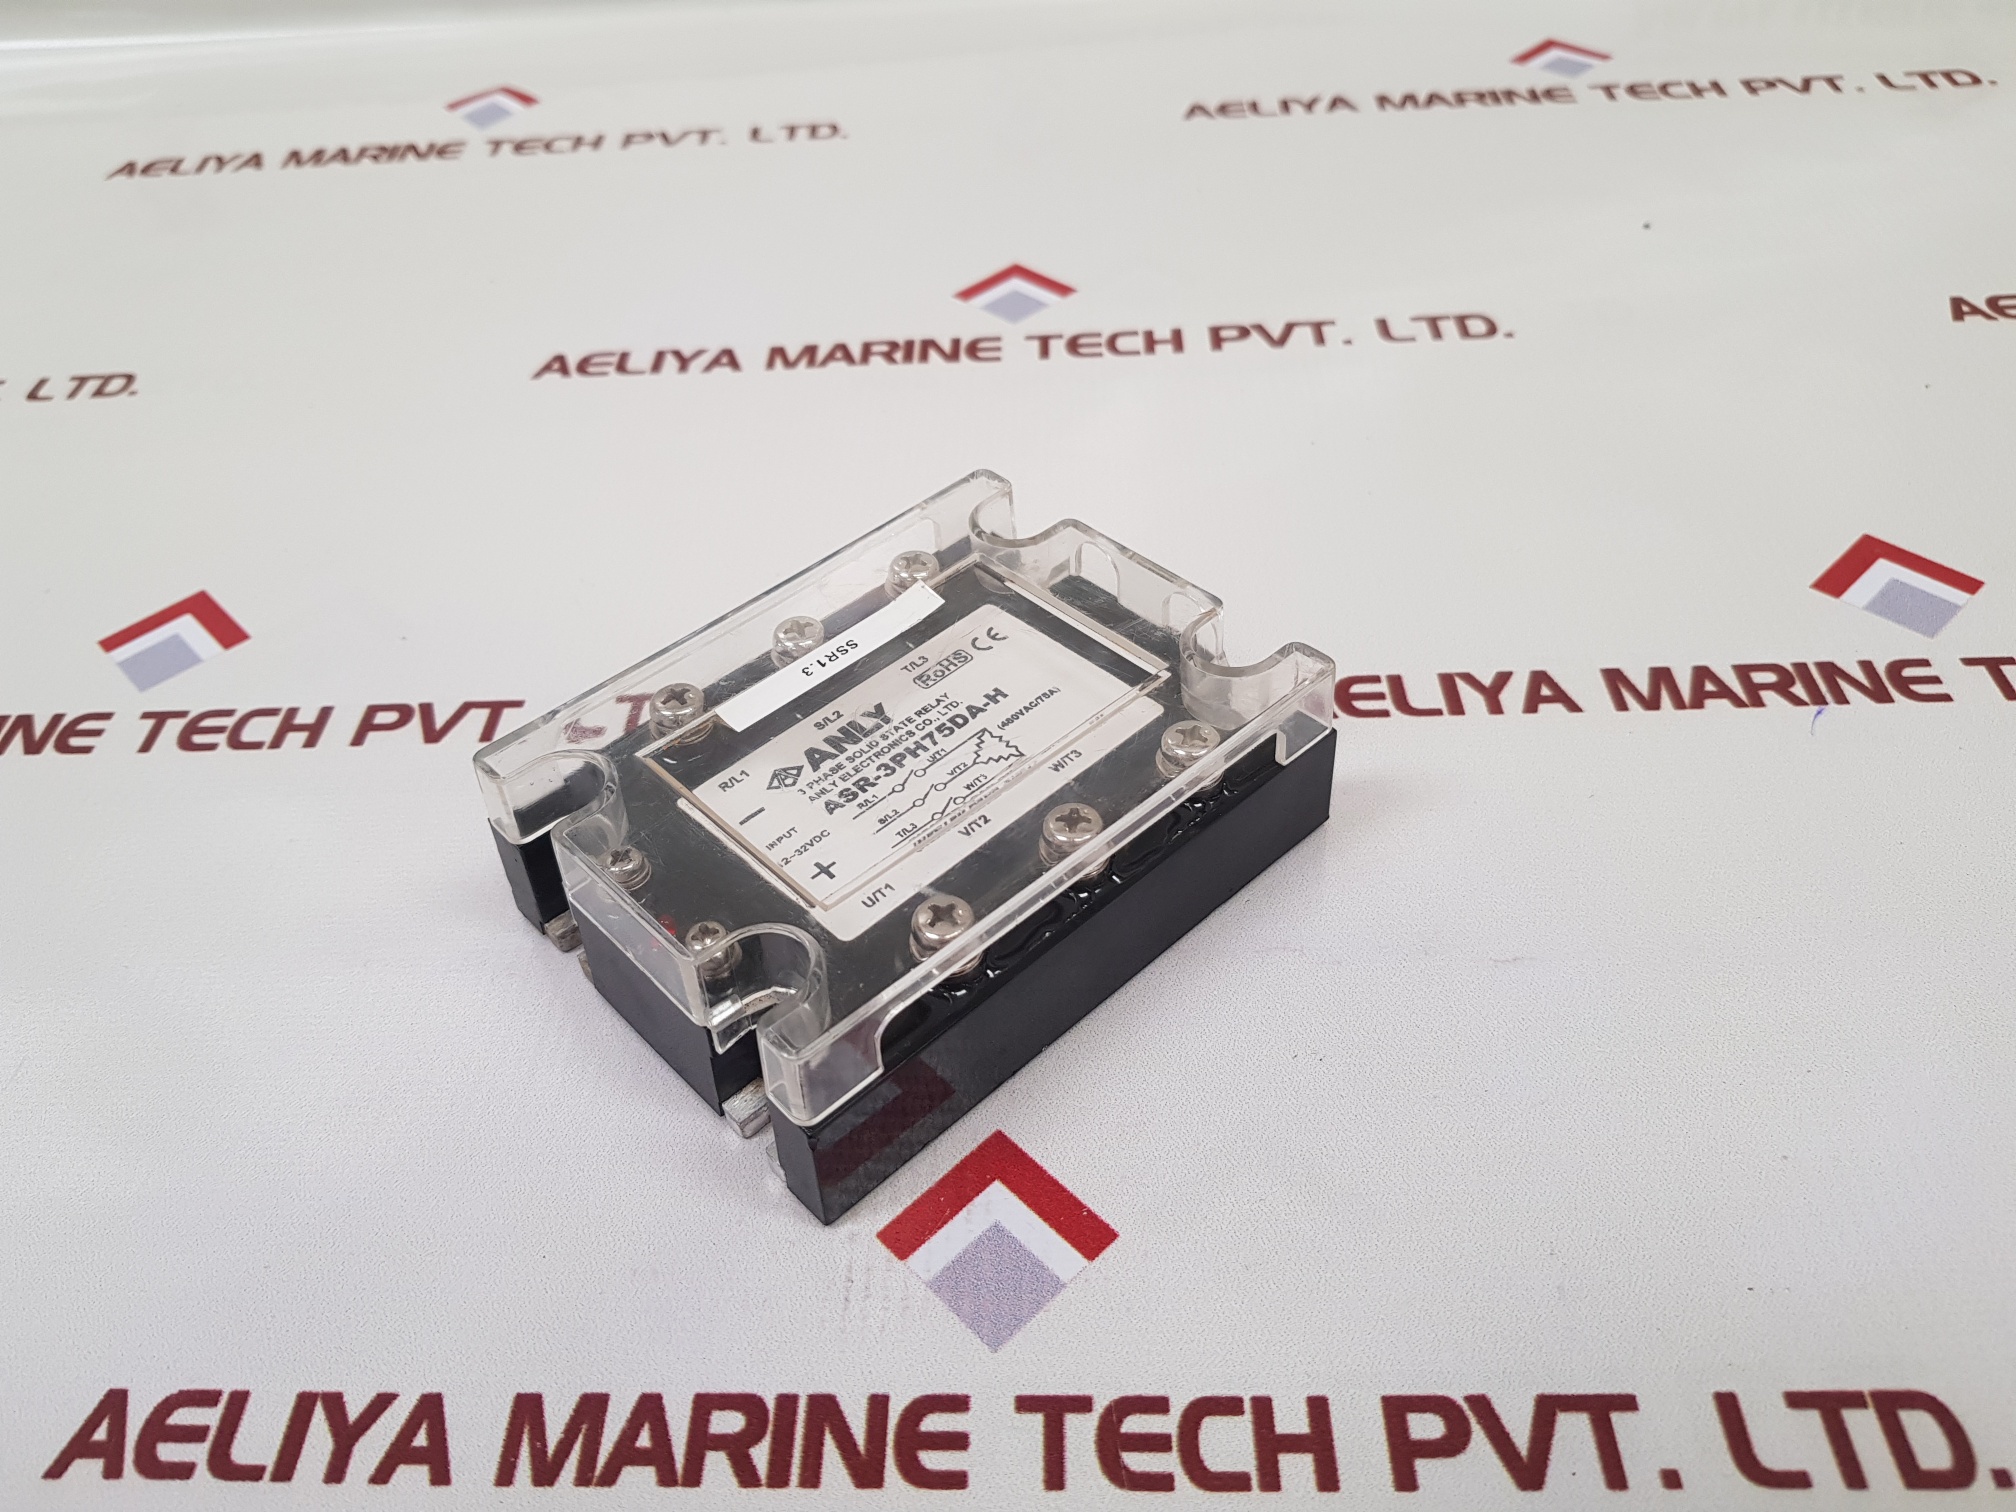 ANLY 3 PHASE SOLID STATE RELAY ASR-3PH75DA-H